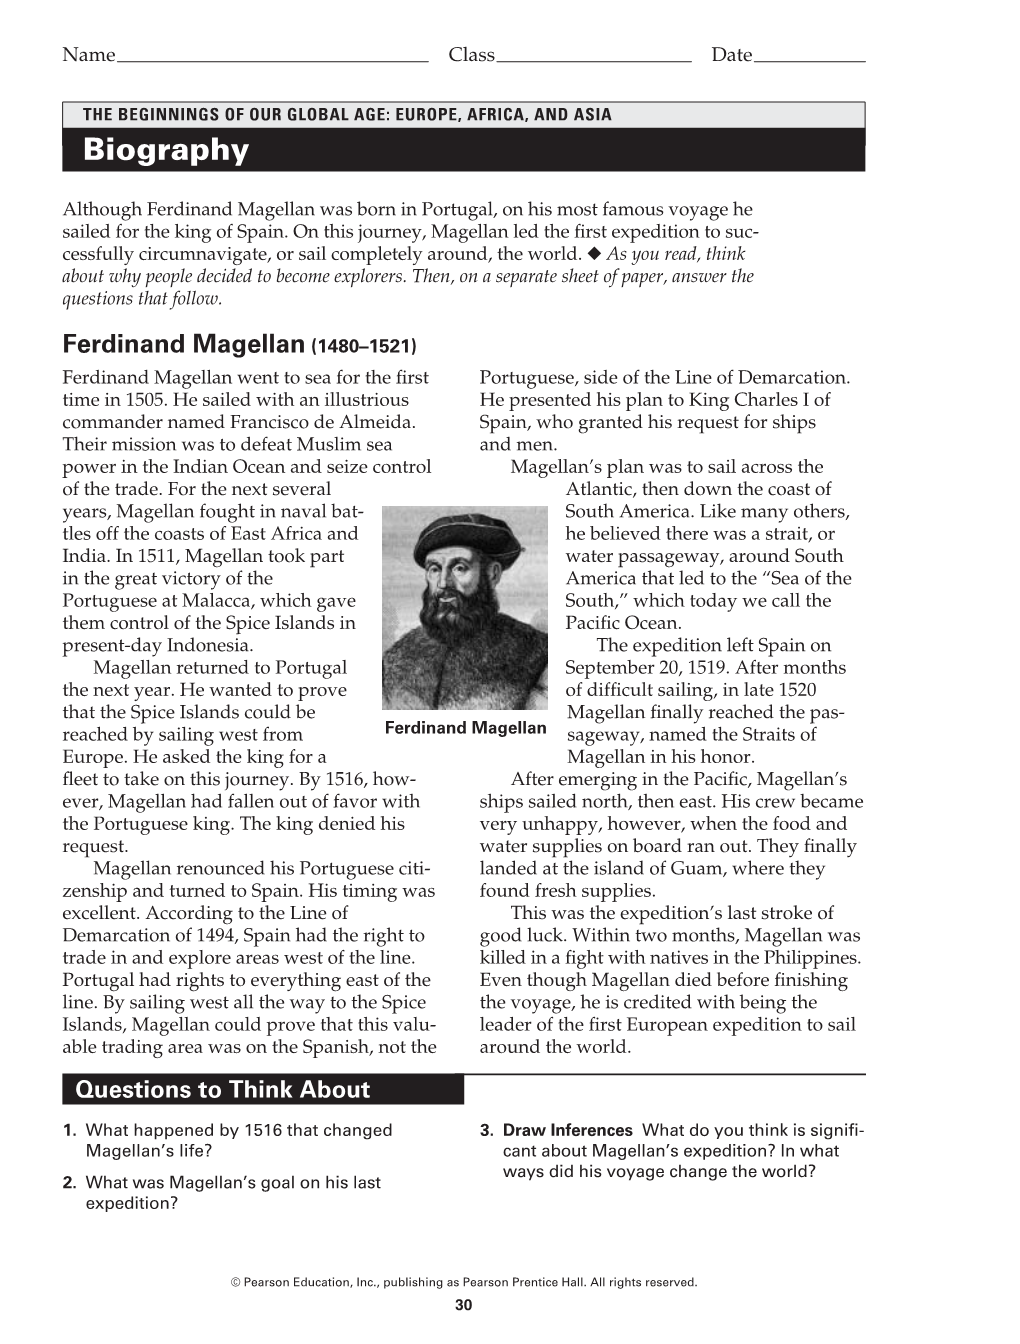 Ferdinand Magellan Was Born in Portugal, on His Most Famous Voyage He Sailed for the King of Spain